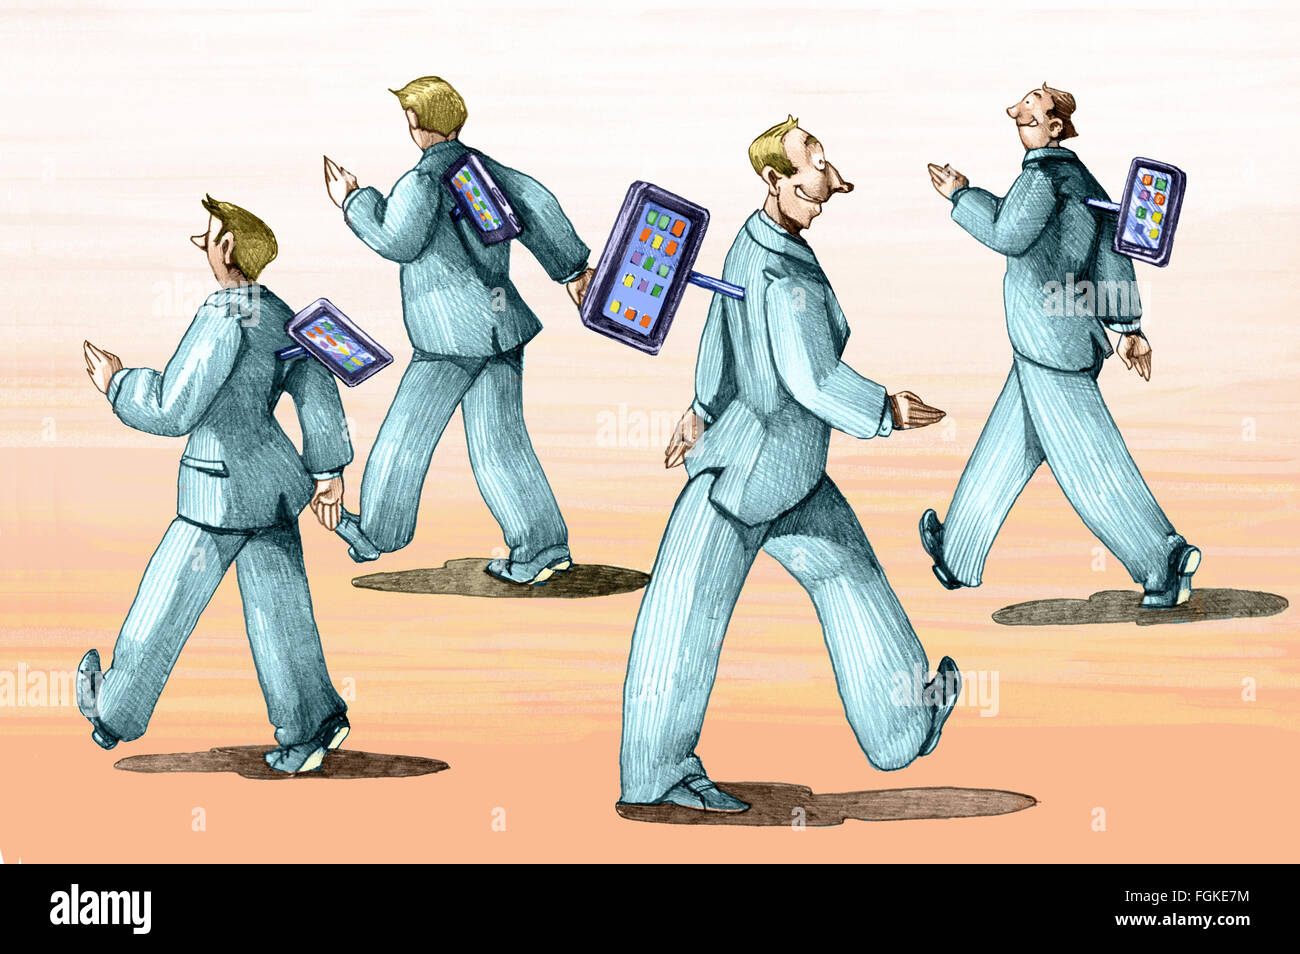 men walk like automatons controlled by your mobile phone Stock Photo